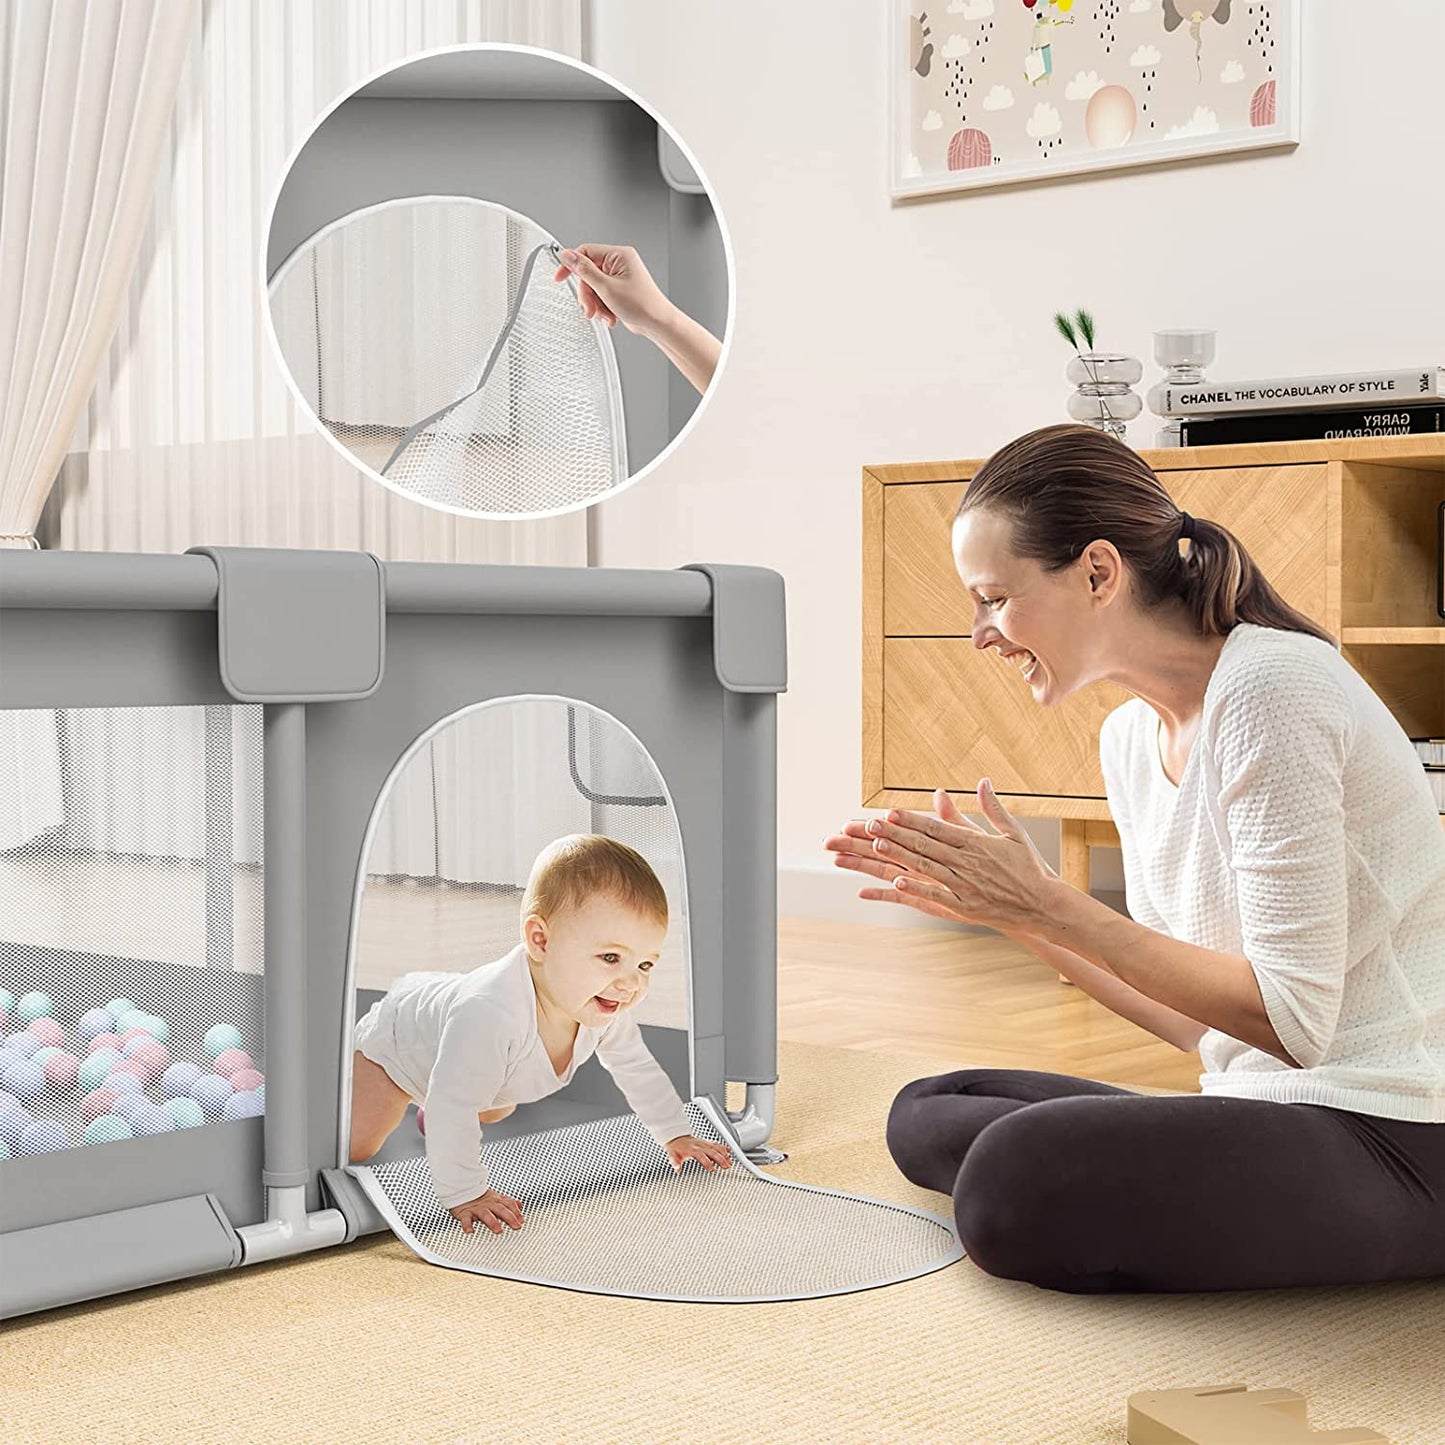 COOLBABY WL802 Children's play game fence Spacious and Secure Baby Playpen - COOL BABY